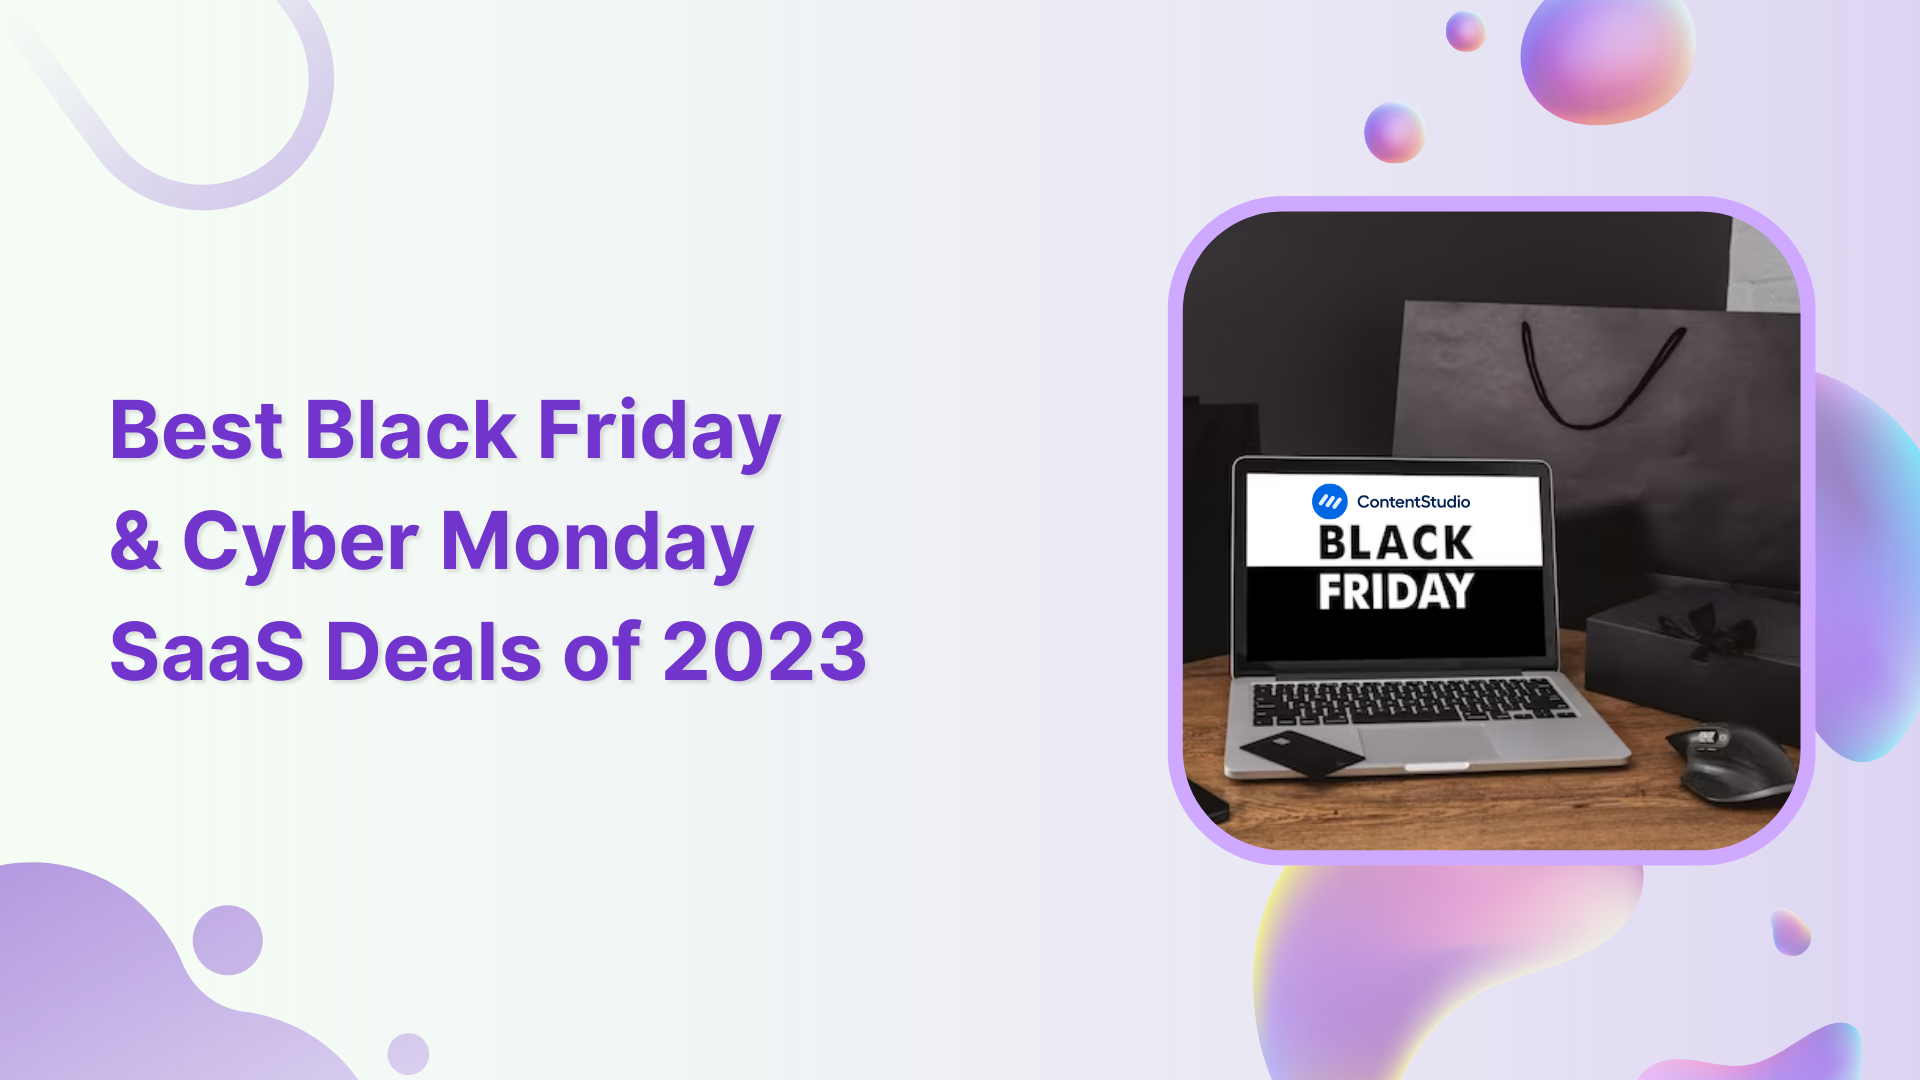 The Best Black Friday & Cyber Monday SaaS Deals of 2023